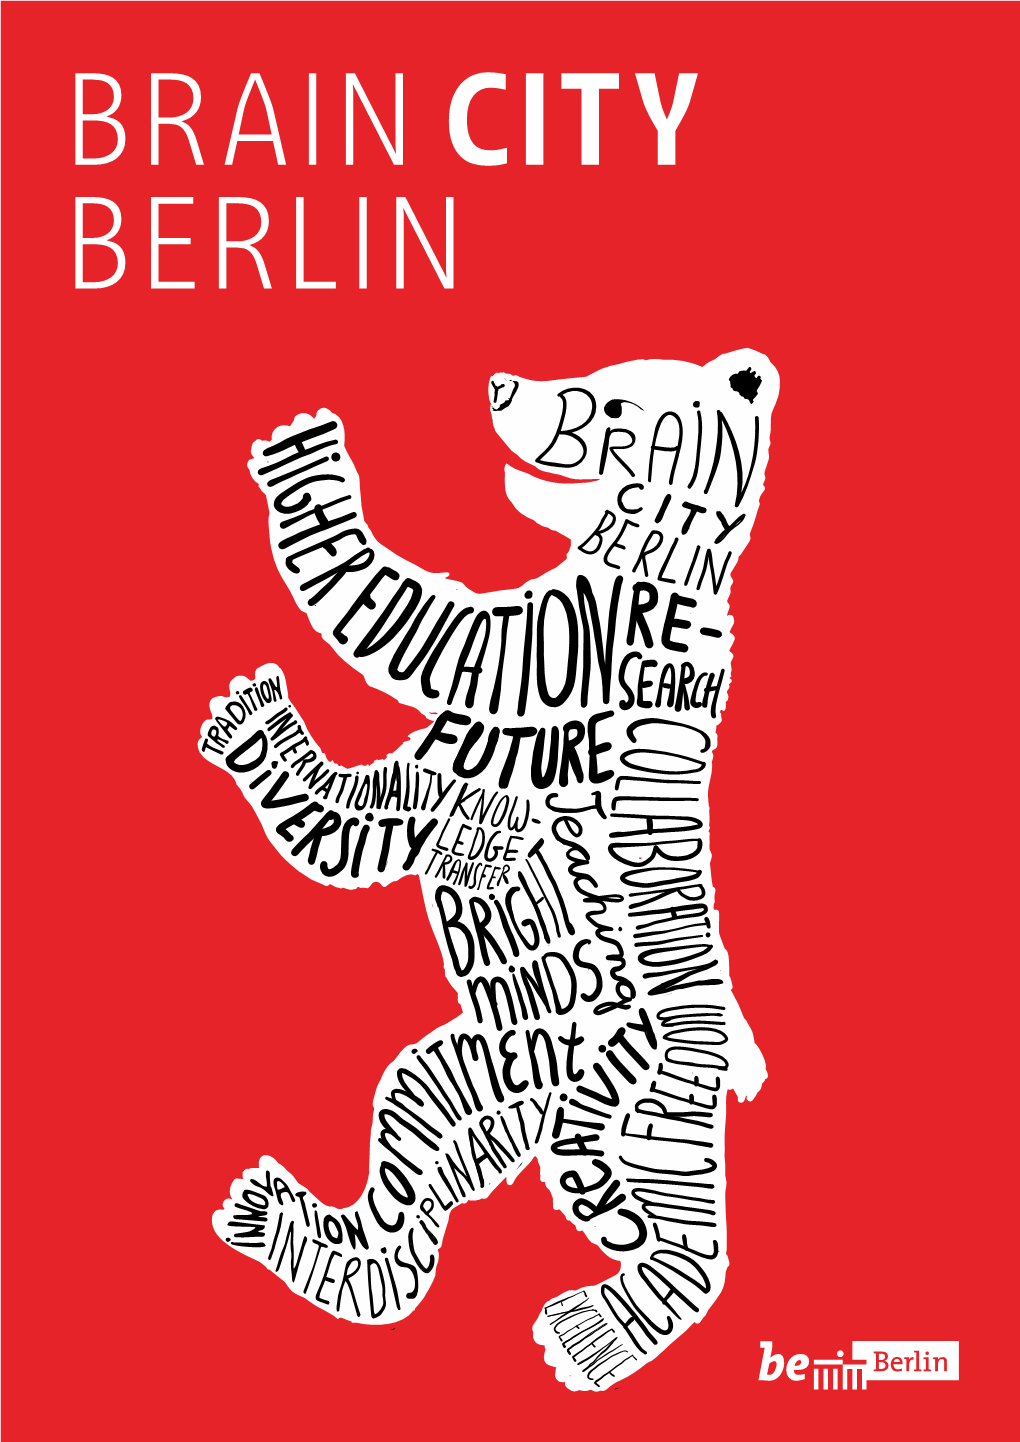 City: More Than the Brain City Map Higher Education and Research Are ∑8Um of Its Parts 10(Removable) International,13 and So Is Berlin